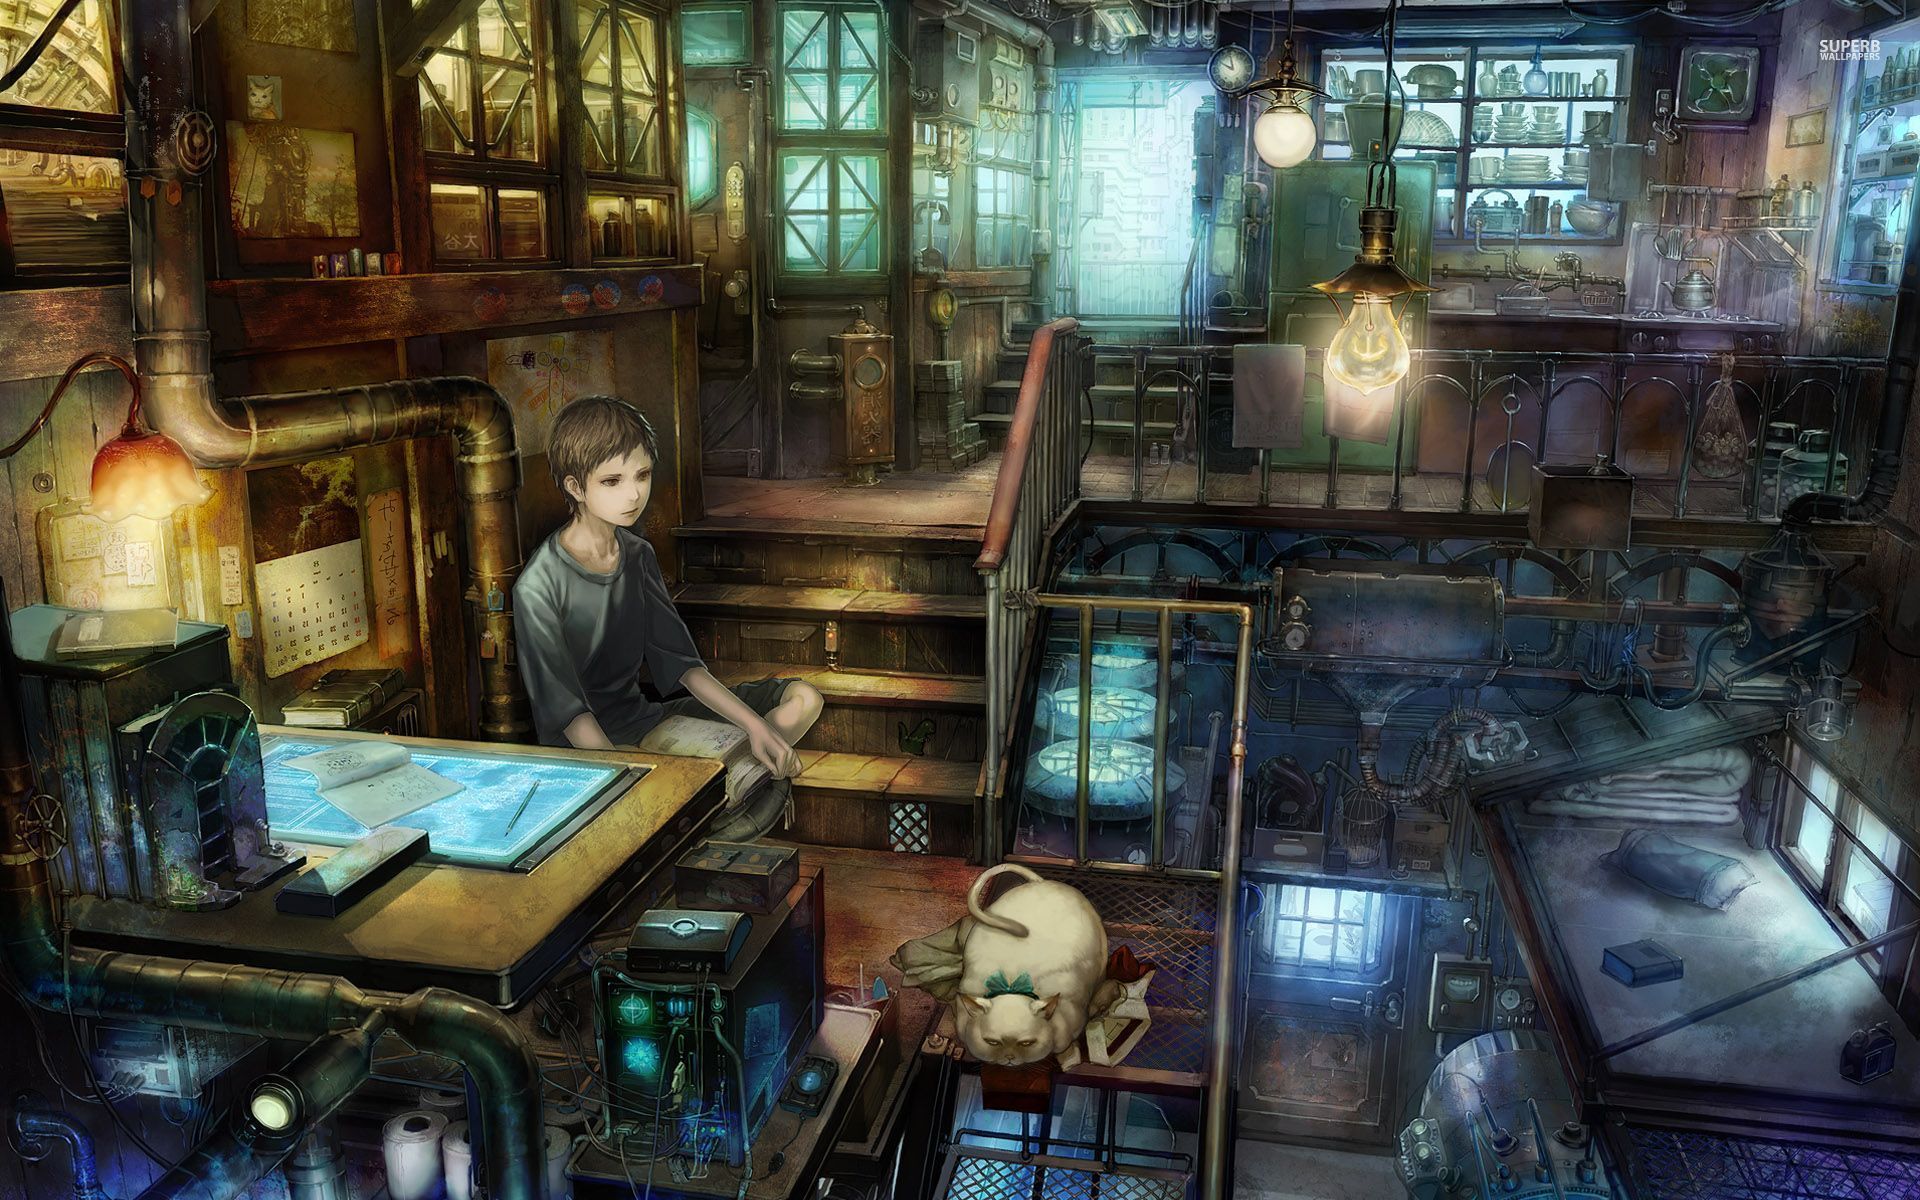 Boy painting a cat in the steampunk city Desktop and mobile